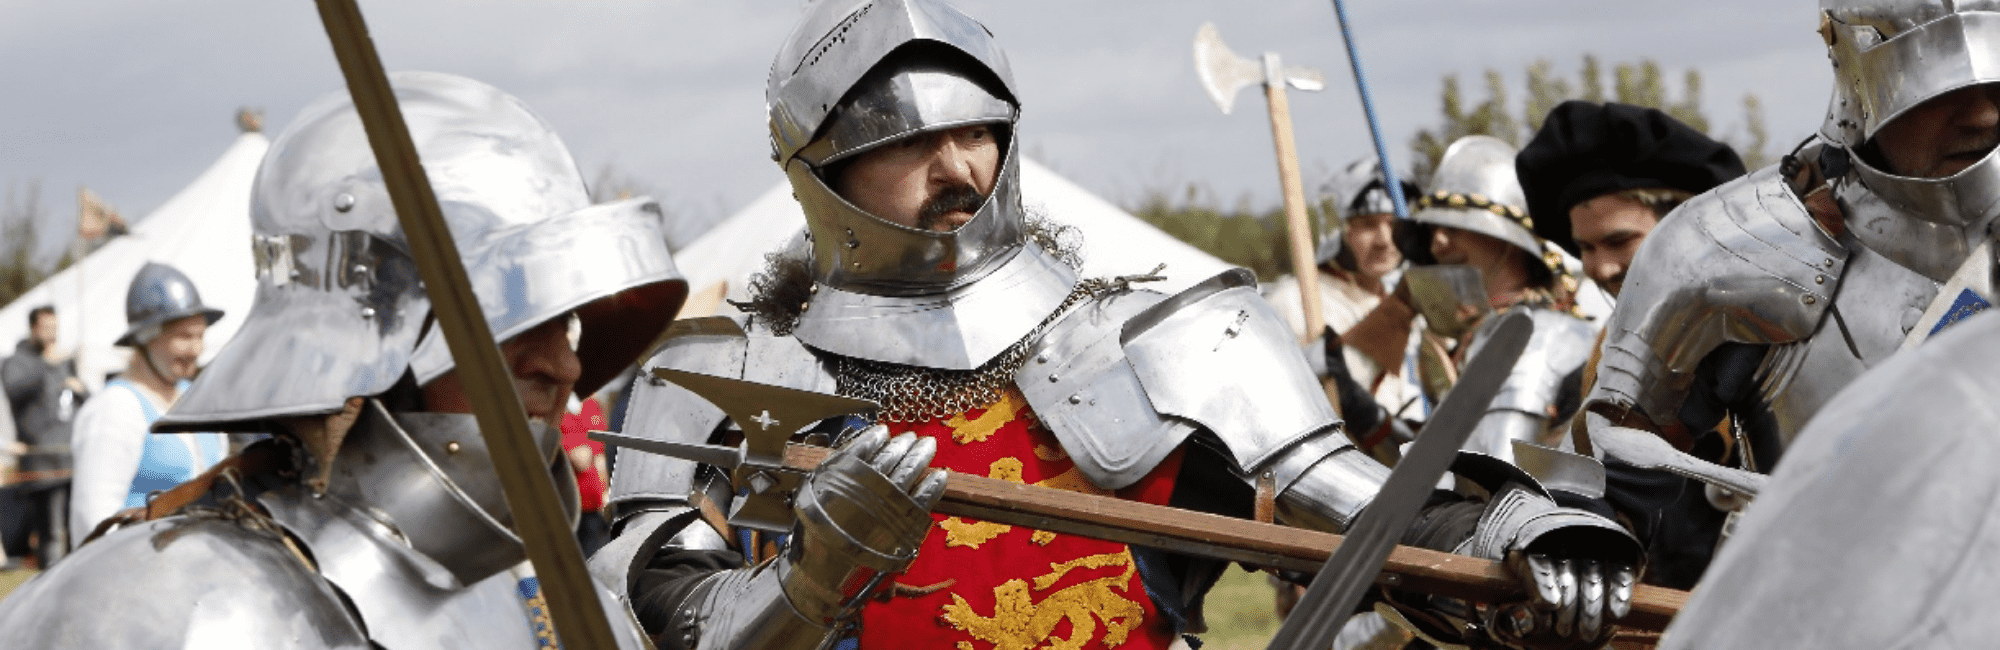 Bosworth Battlefield Heritage Centre & Country Park | GoLeicestershire.com